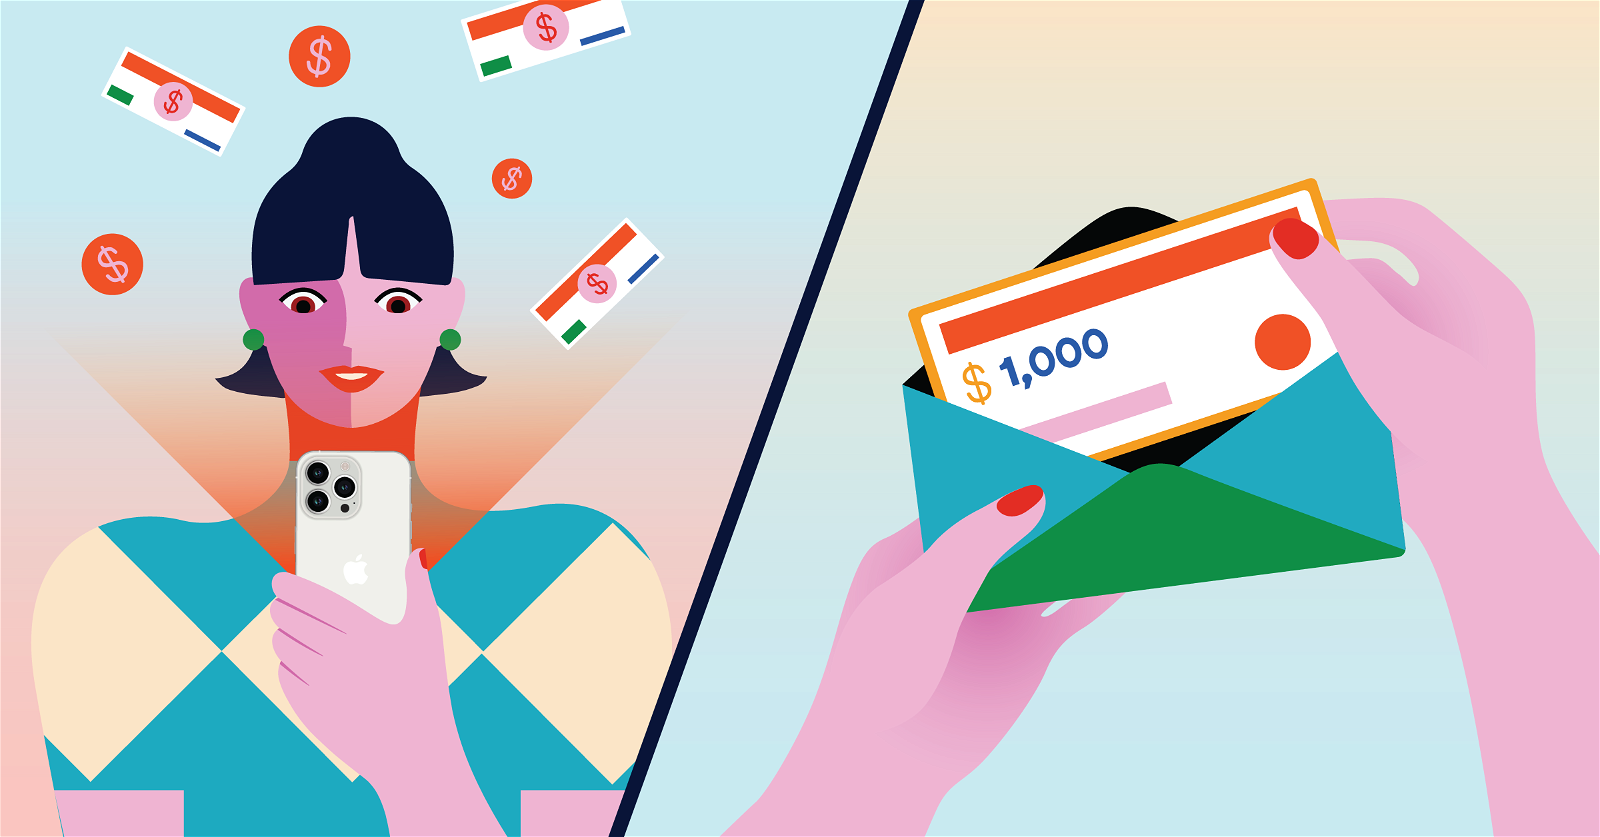 Illustration featuring a woman holding a smartphone on the left, with currency symbols and Indian flags around her. On the right, hands hold an envelope containing a check for $1,000. The background is split diagonally, light blue on the left and beige on the right.